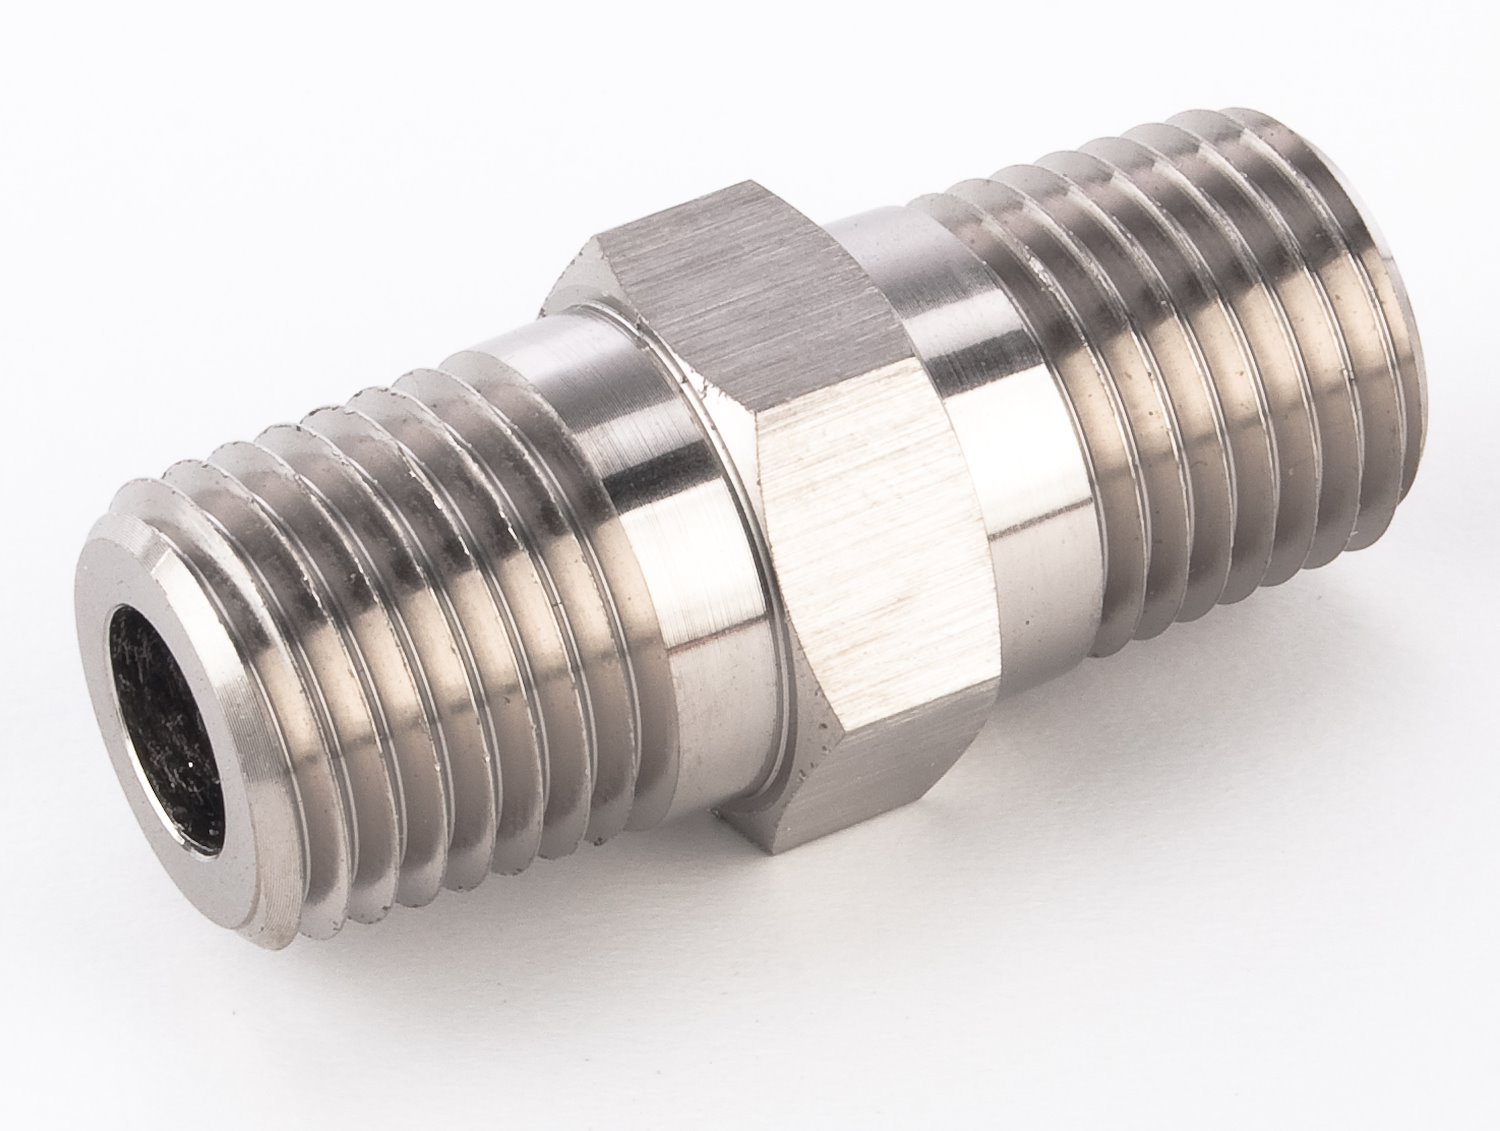 NPT to NPT Straight Union Fitting [1/4 in. NPT Male to 1/4 in. NPT Male, Nickle]